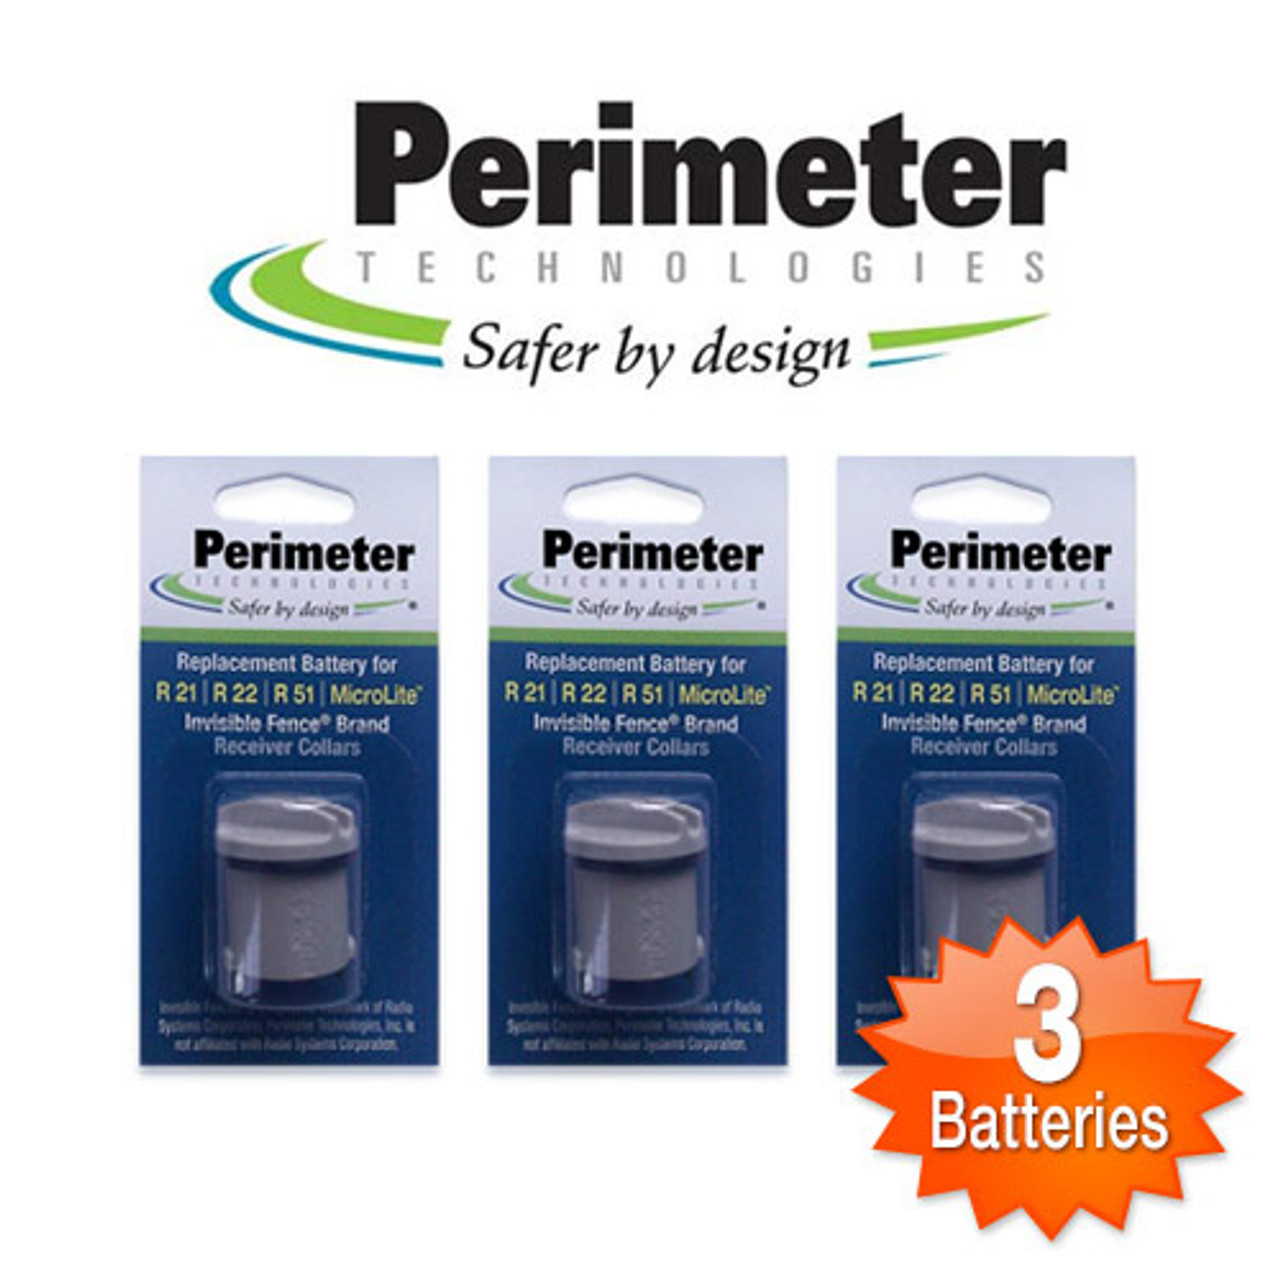 IPerimeter IFA-001 Dog Collar Battery for Invisible Fence R21 R22 R51  MicroLite